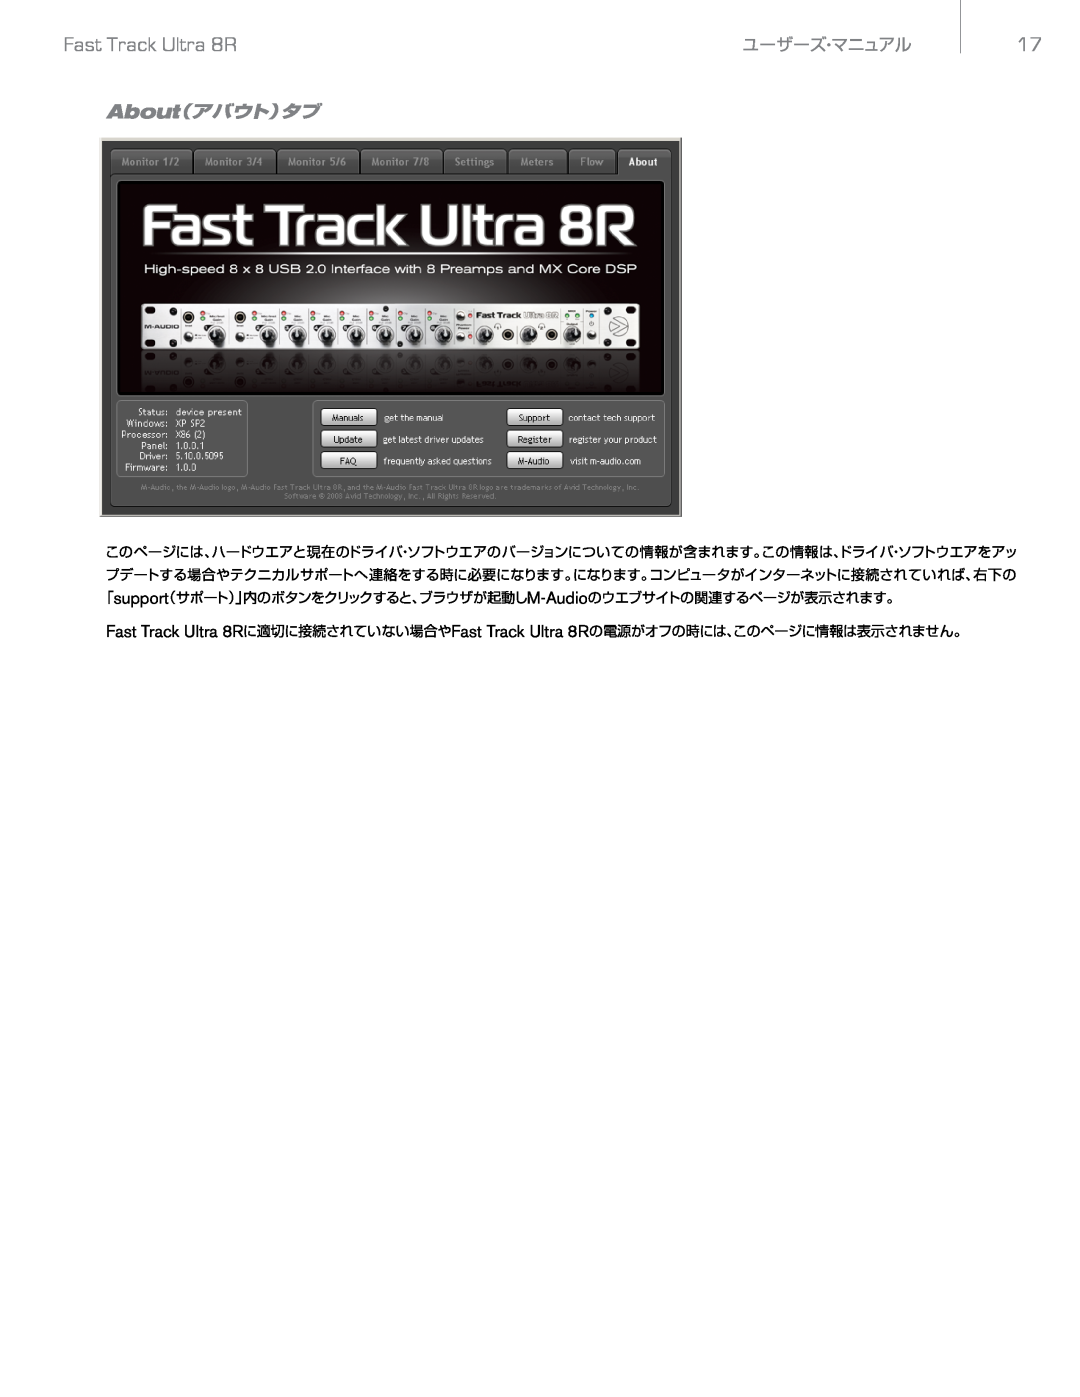 M-Audio manual About（アバウト）タブ, Fast Track Ultra 8R, ユーザーズ・マニュアル 